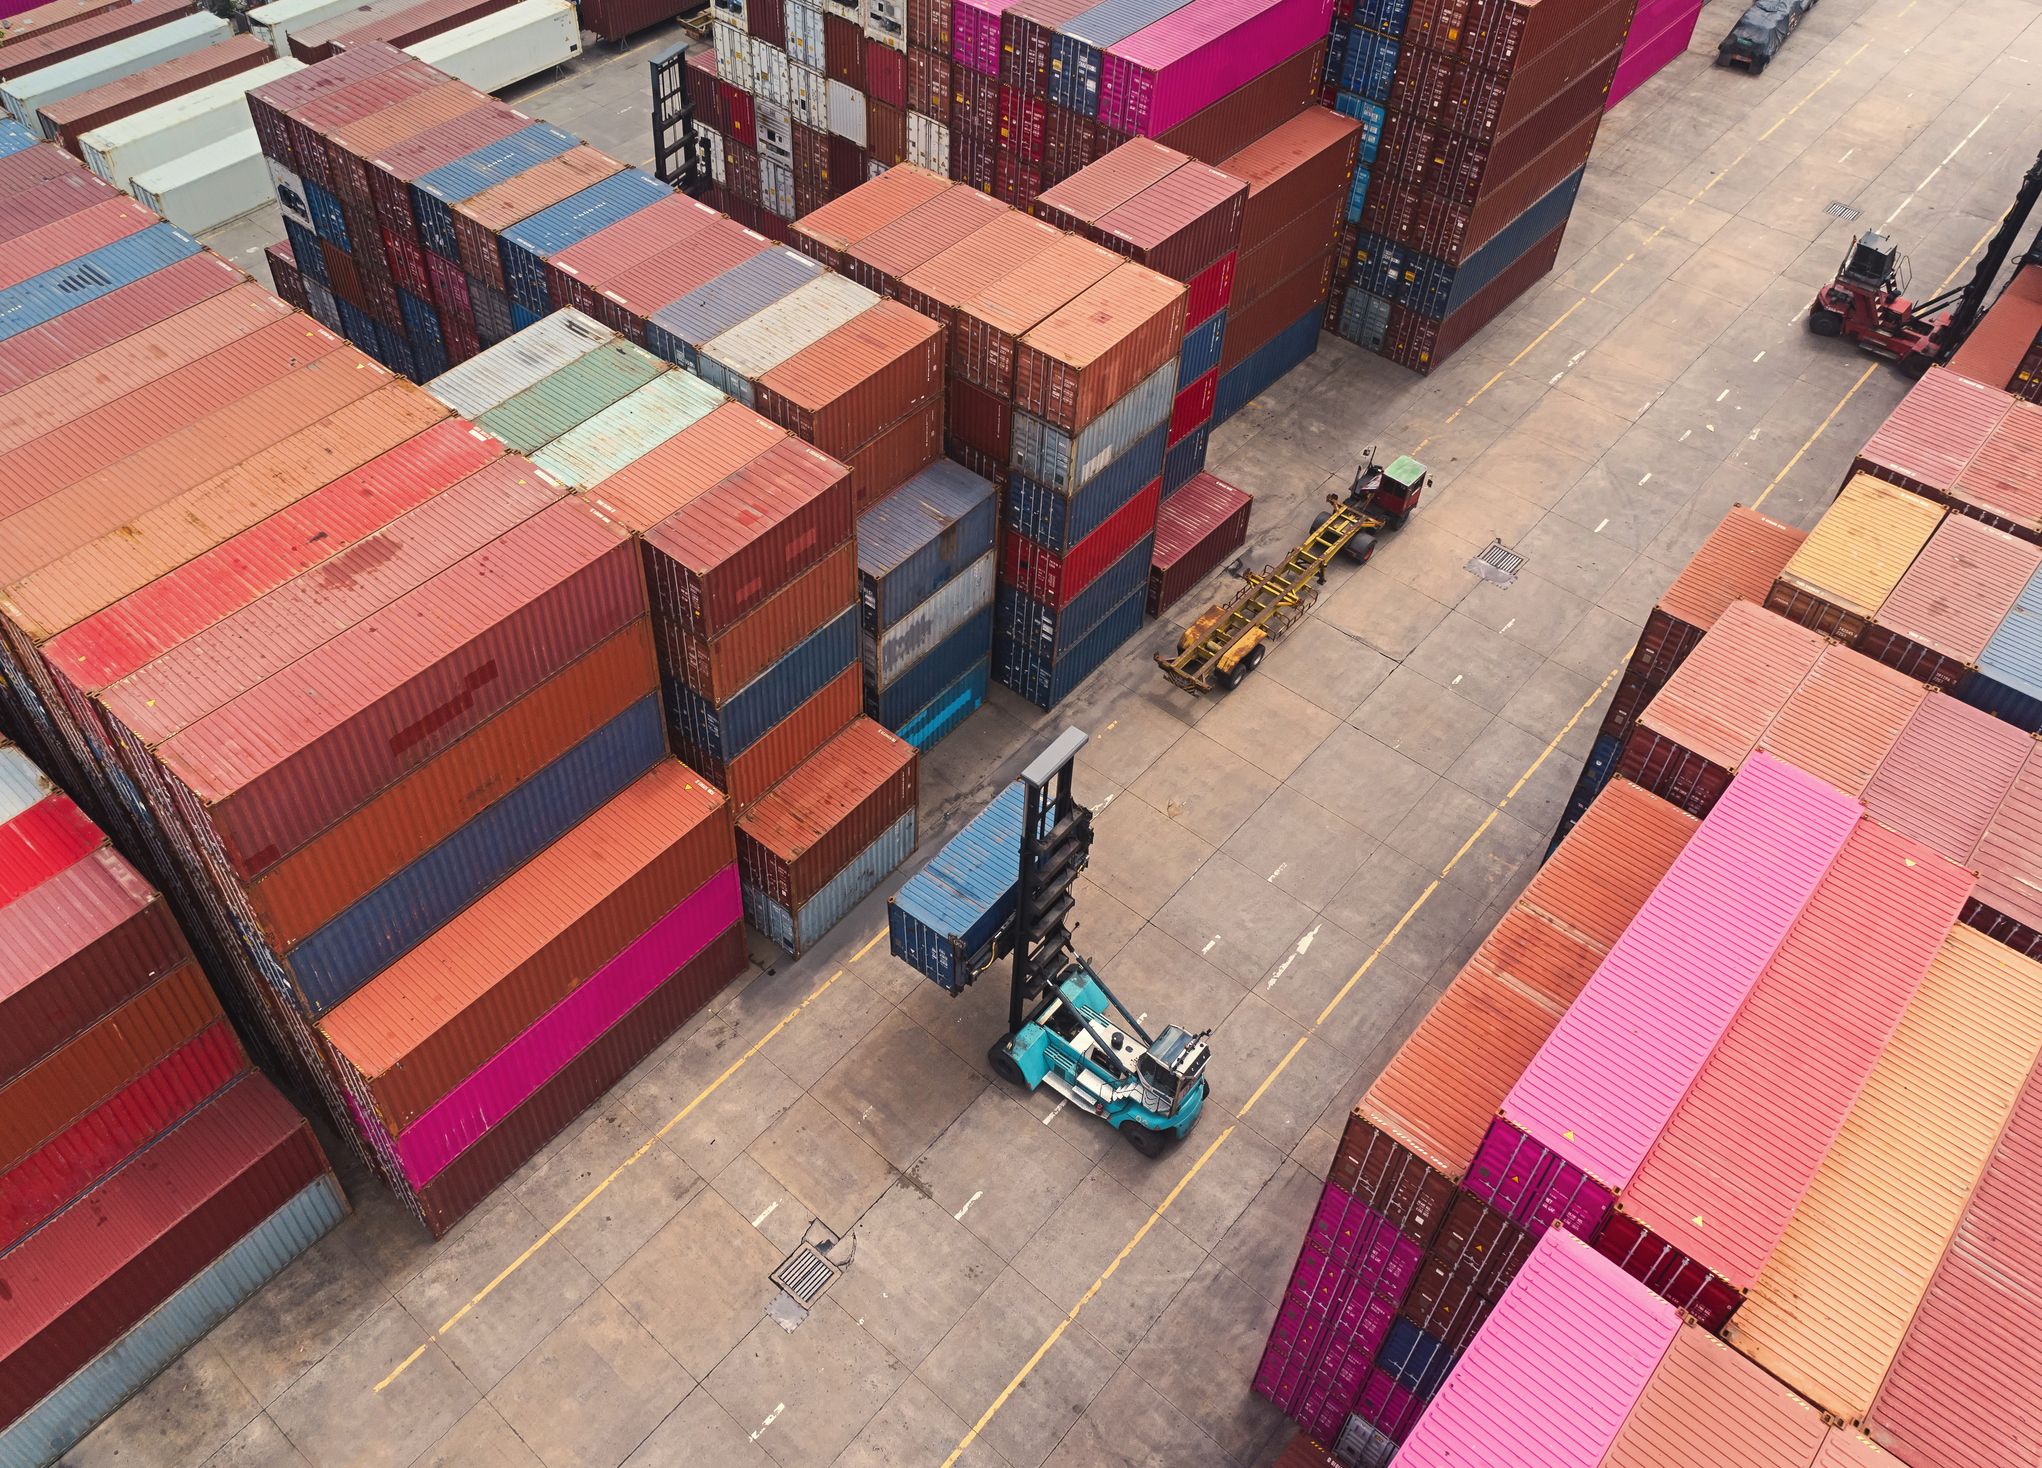 forklift handling container at terminal commercial port for business logistics, import export shipping or freight transportation